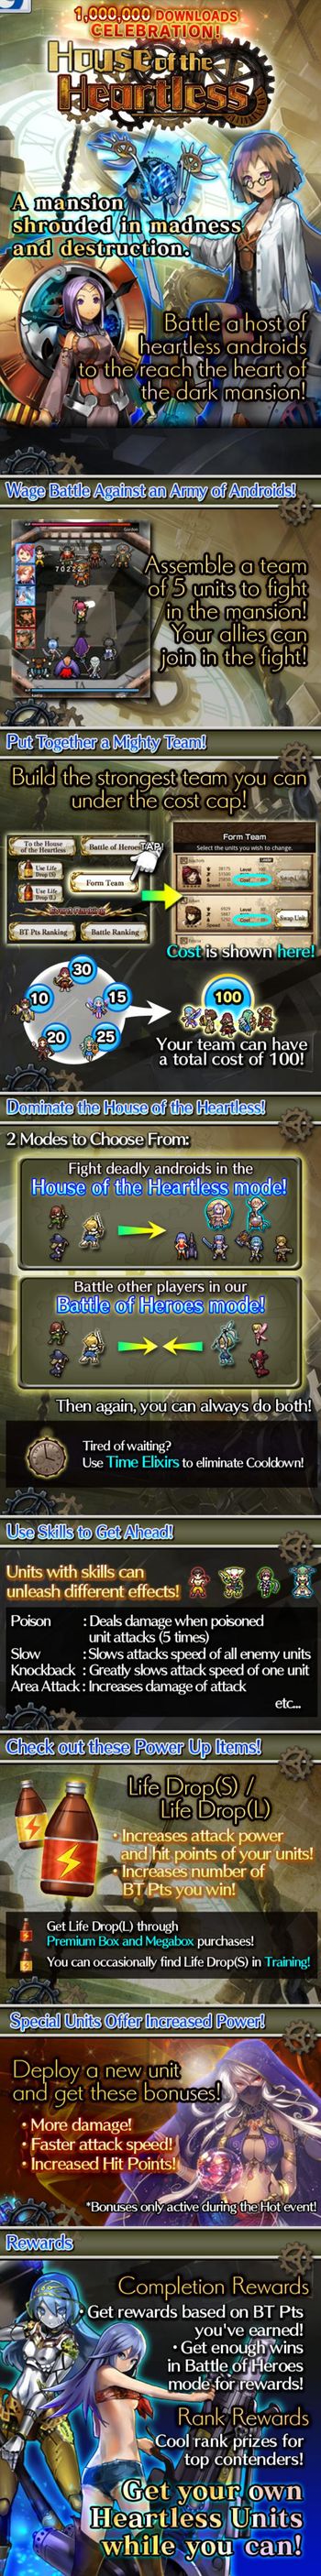 House of the Heartless release.jpg